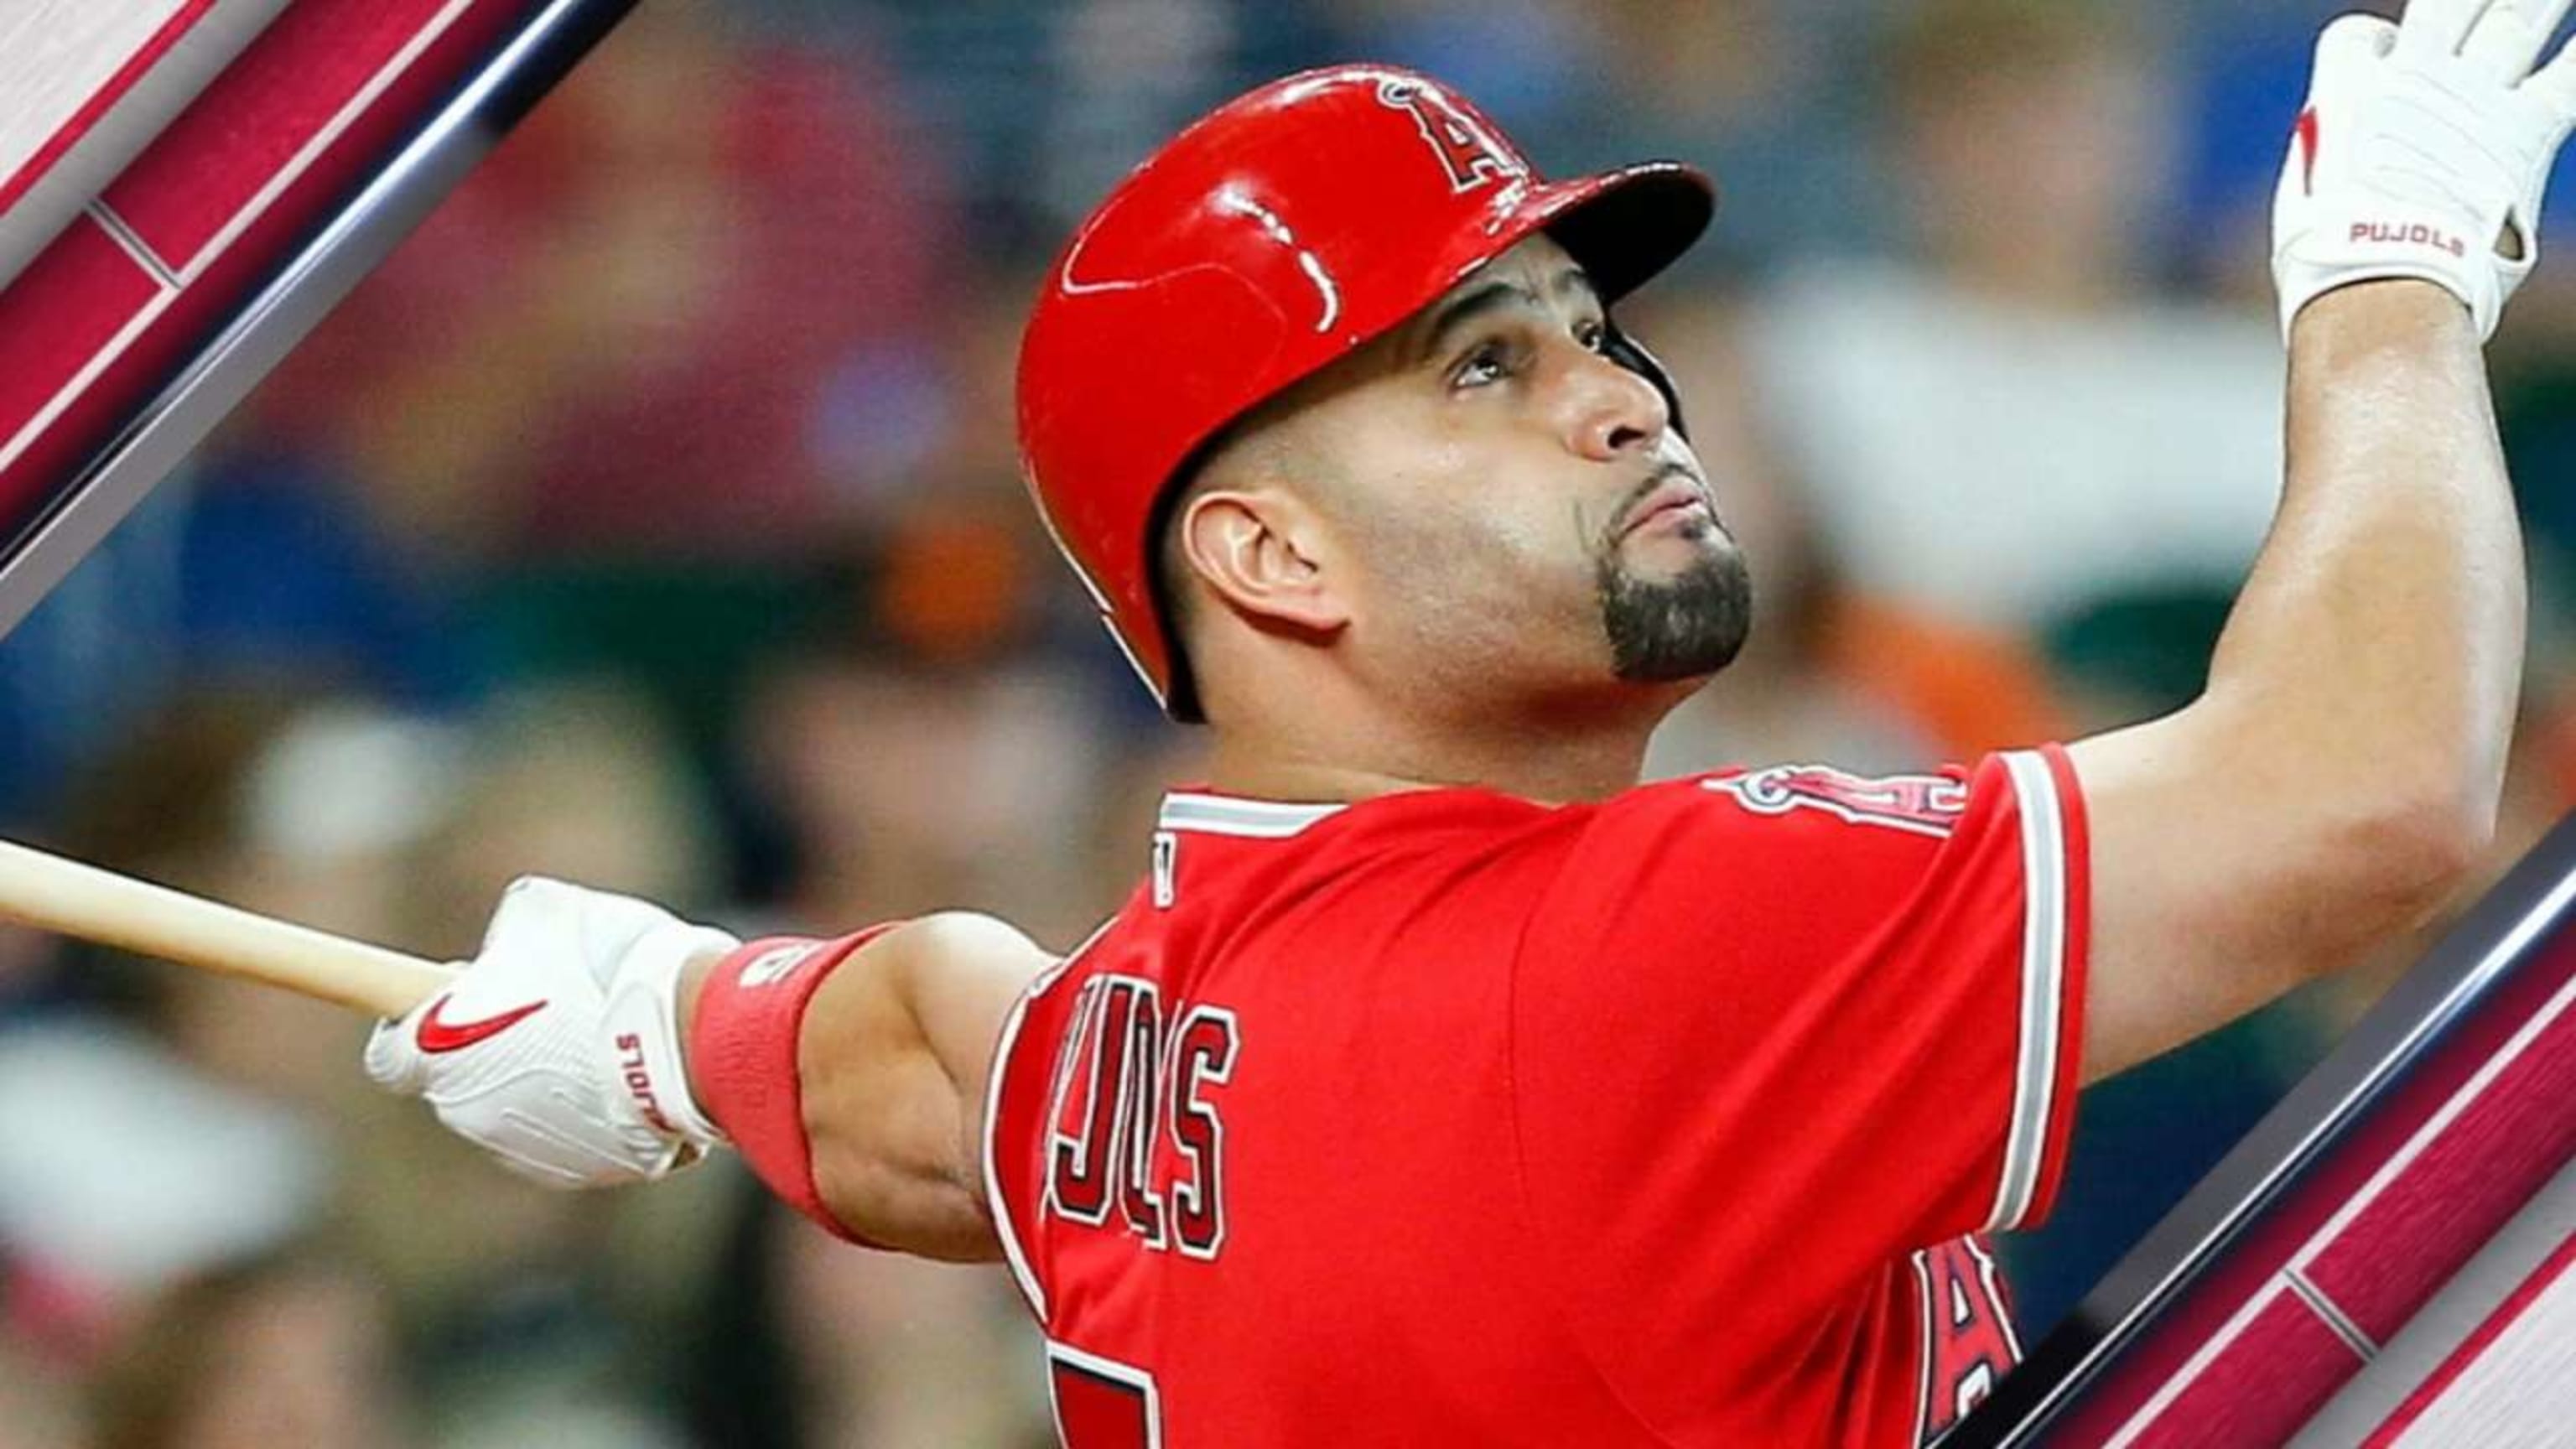 MLB - With his appearance today, Albert Pujols is just the 9th player in  AL/NL history to play in 3,000 career games.